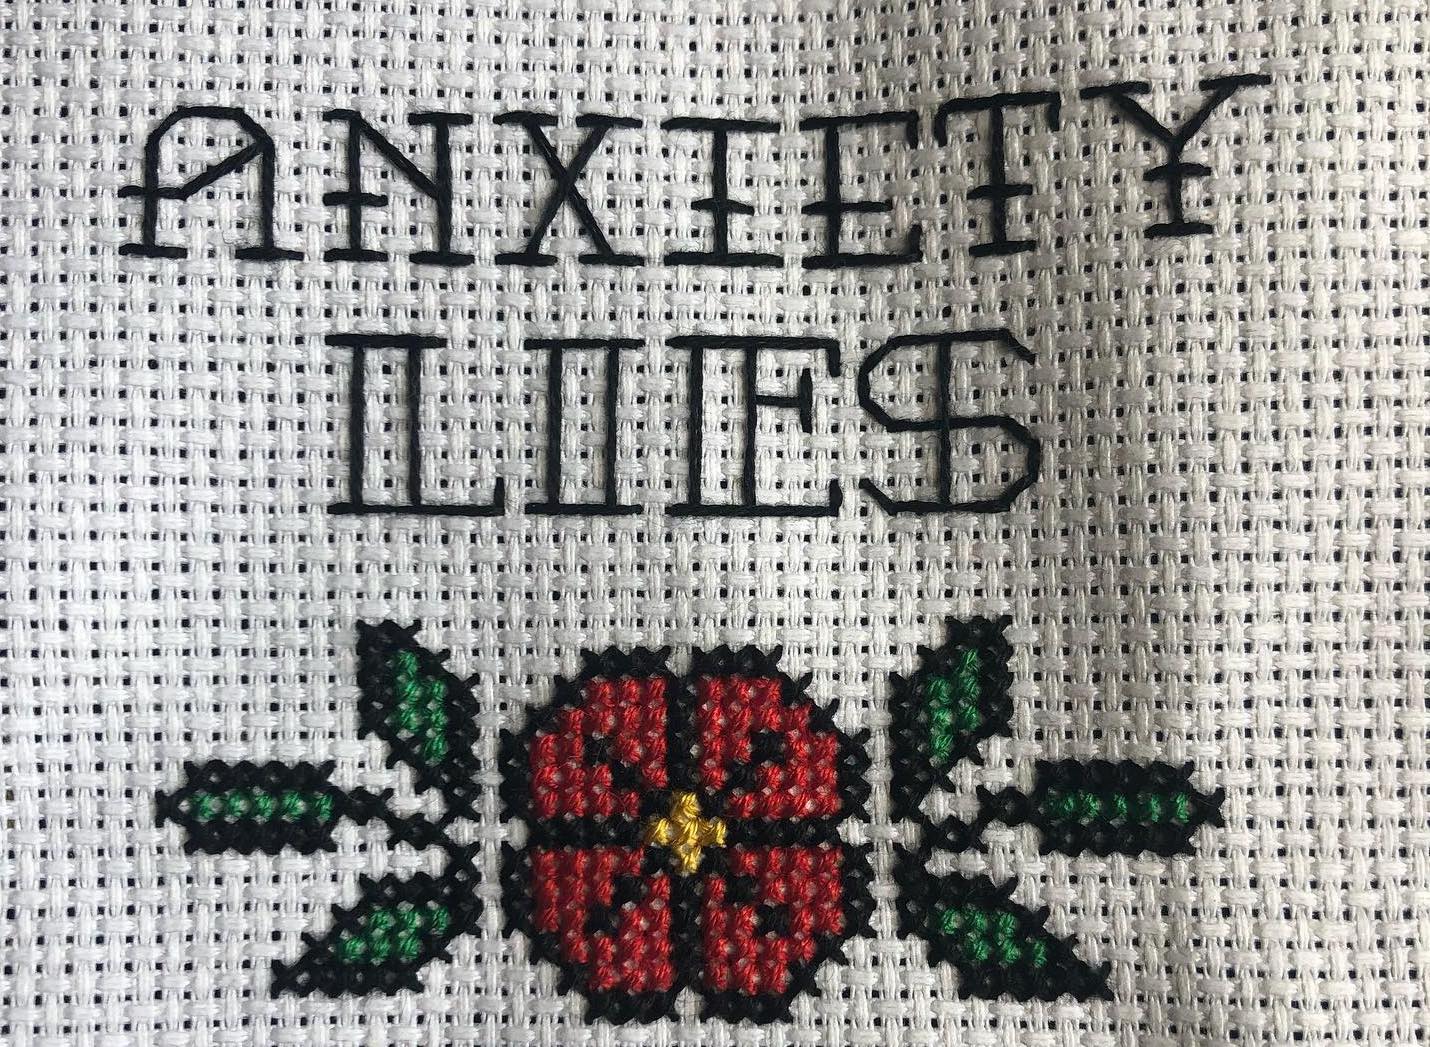 Cross stitch that reads "anxiety lies" with a red flower underneath. The background is white, the text is black.